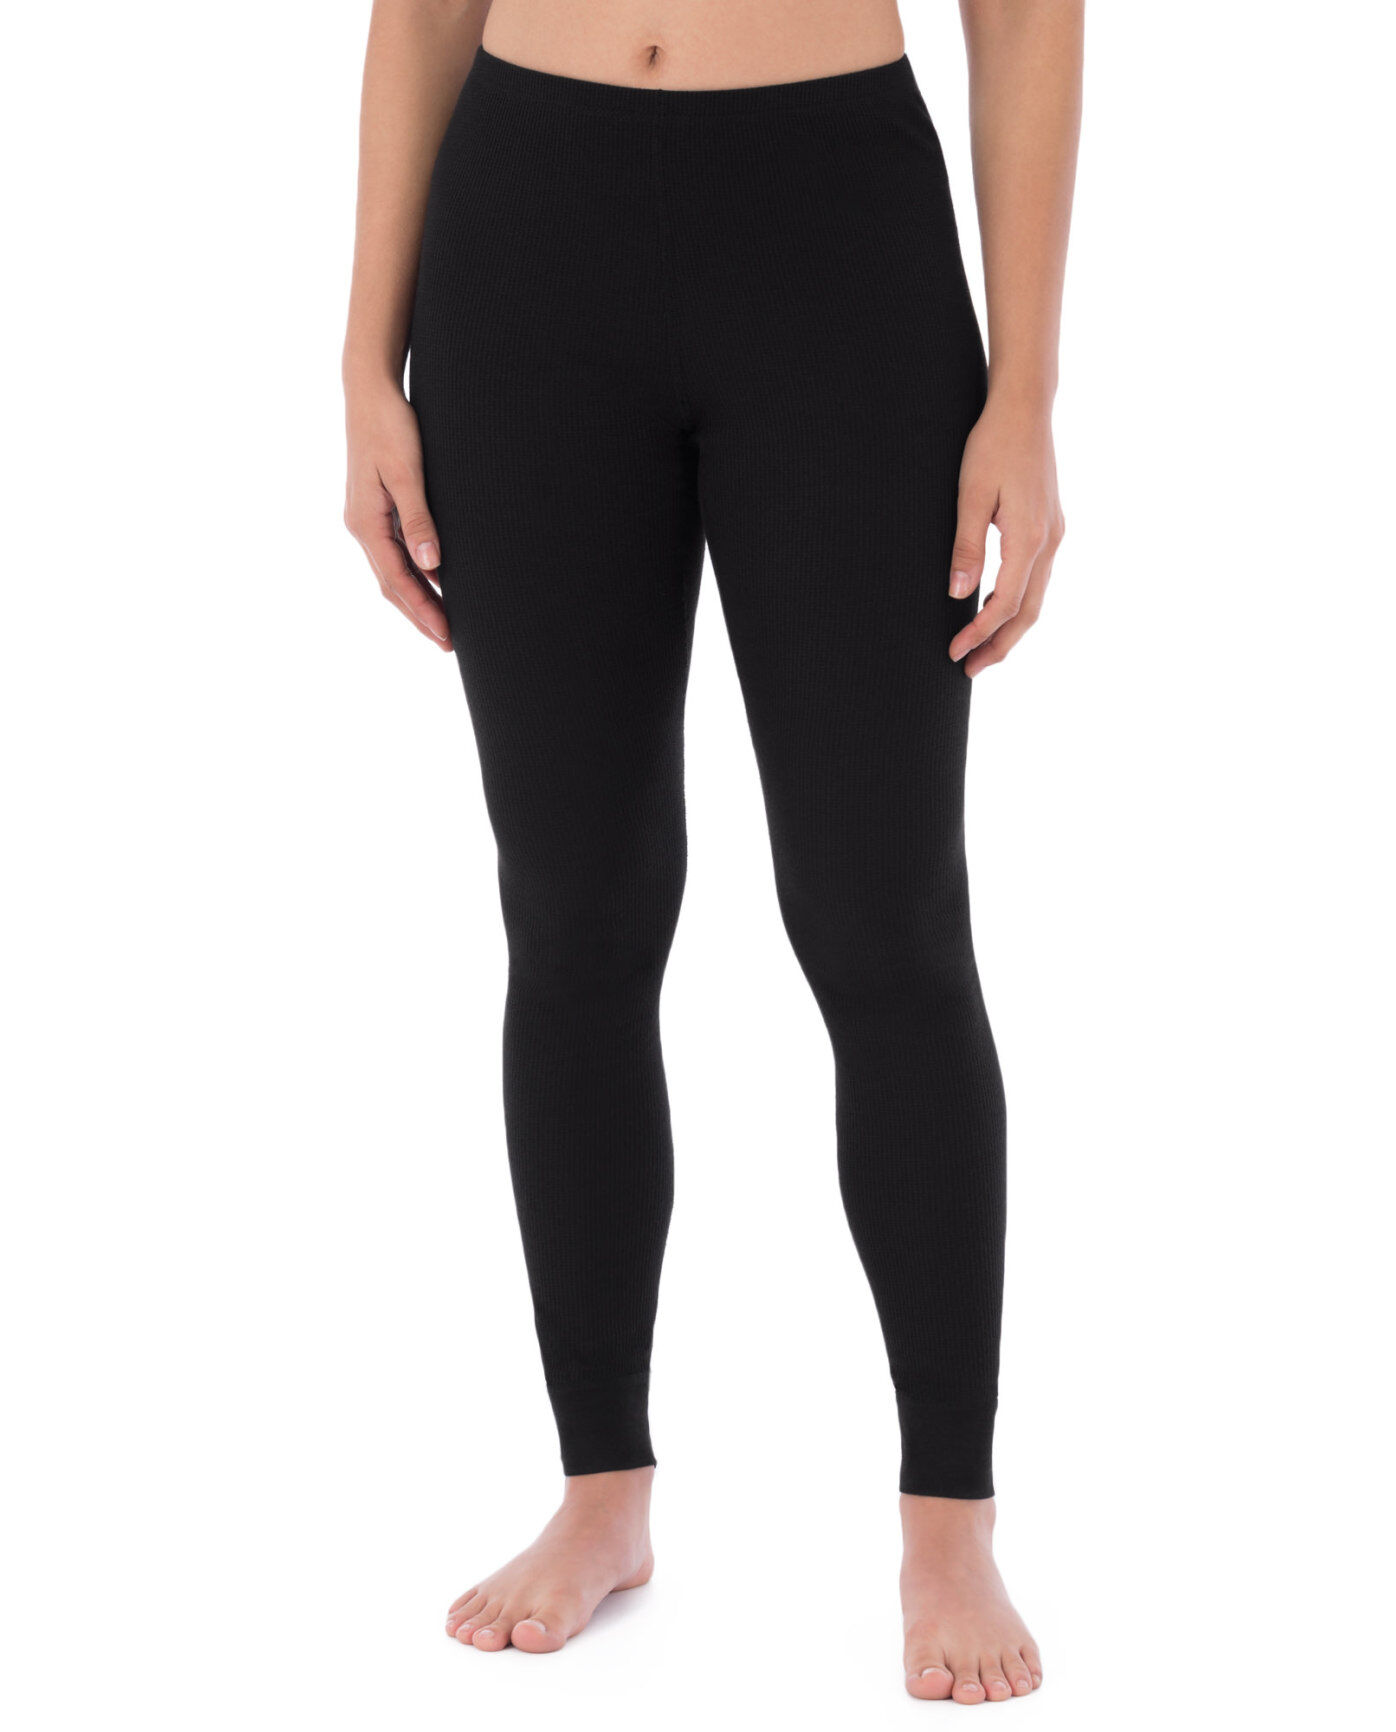 where to buy women's thermal underwear